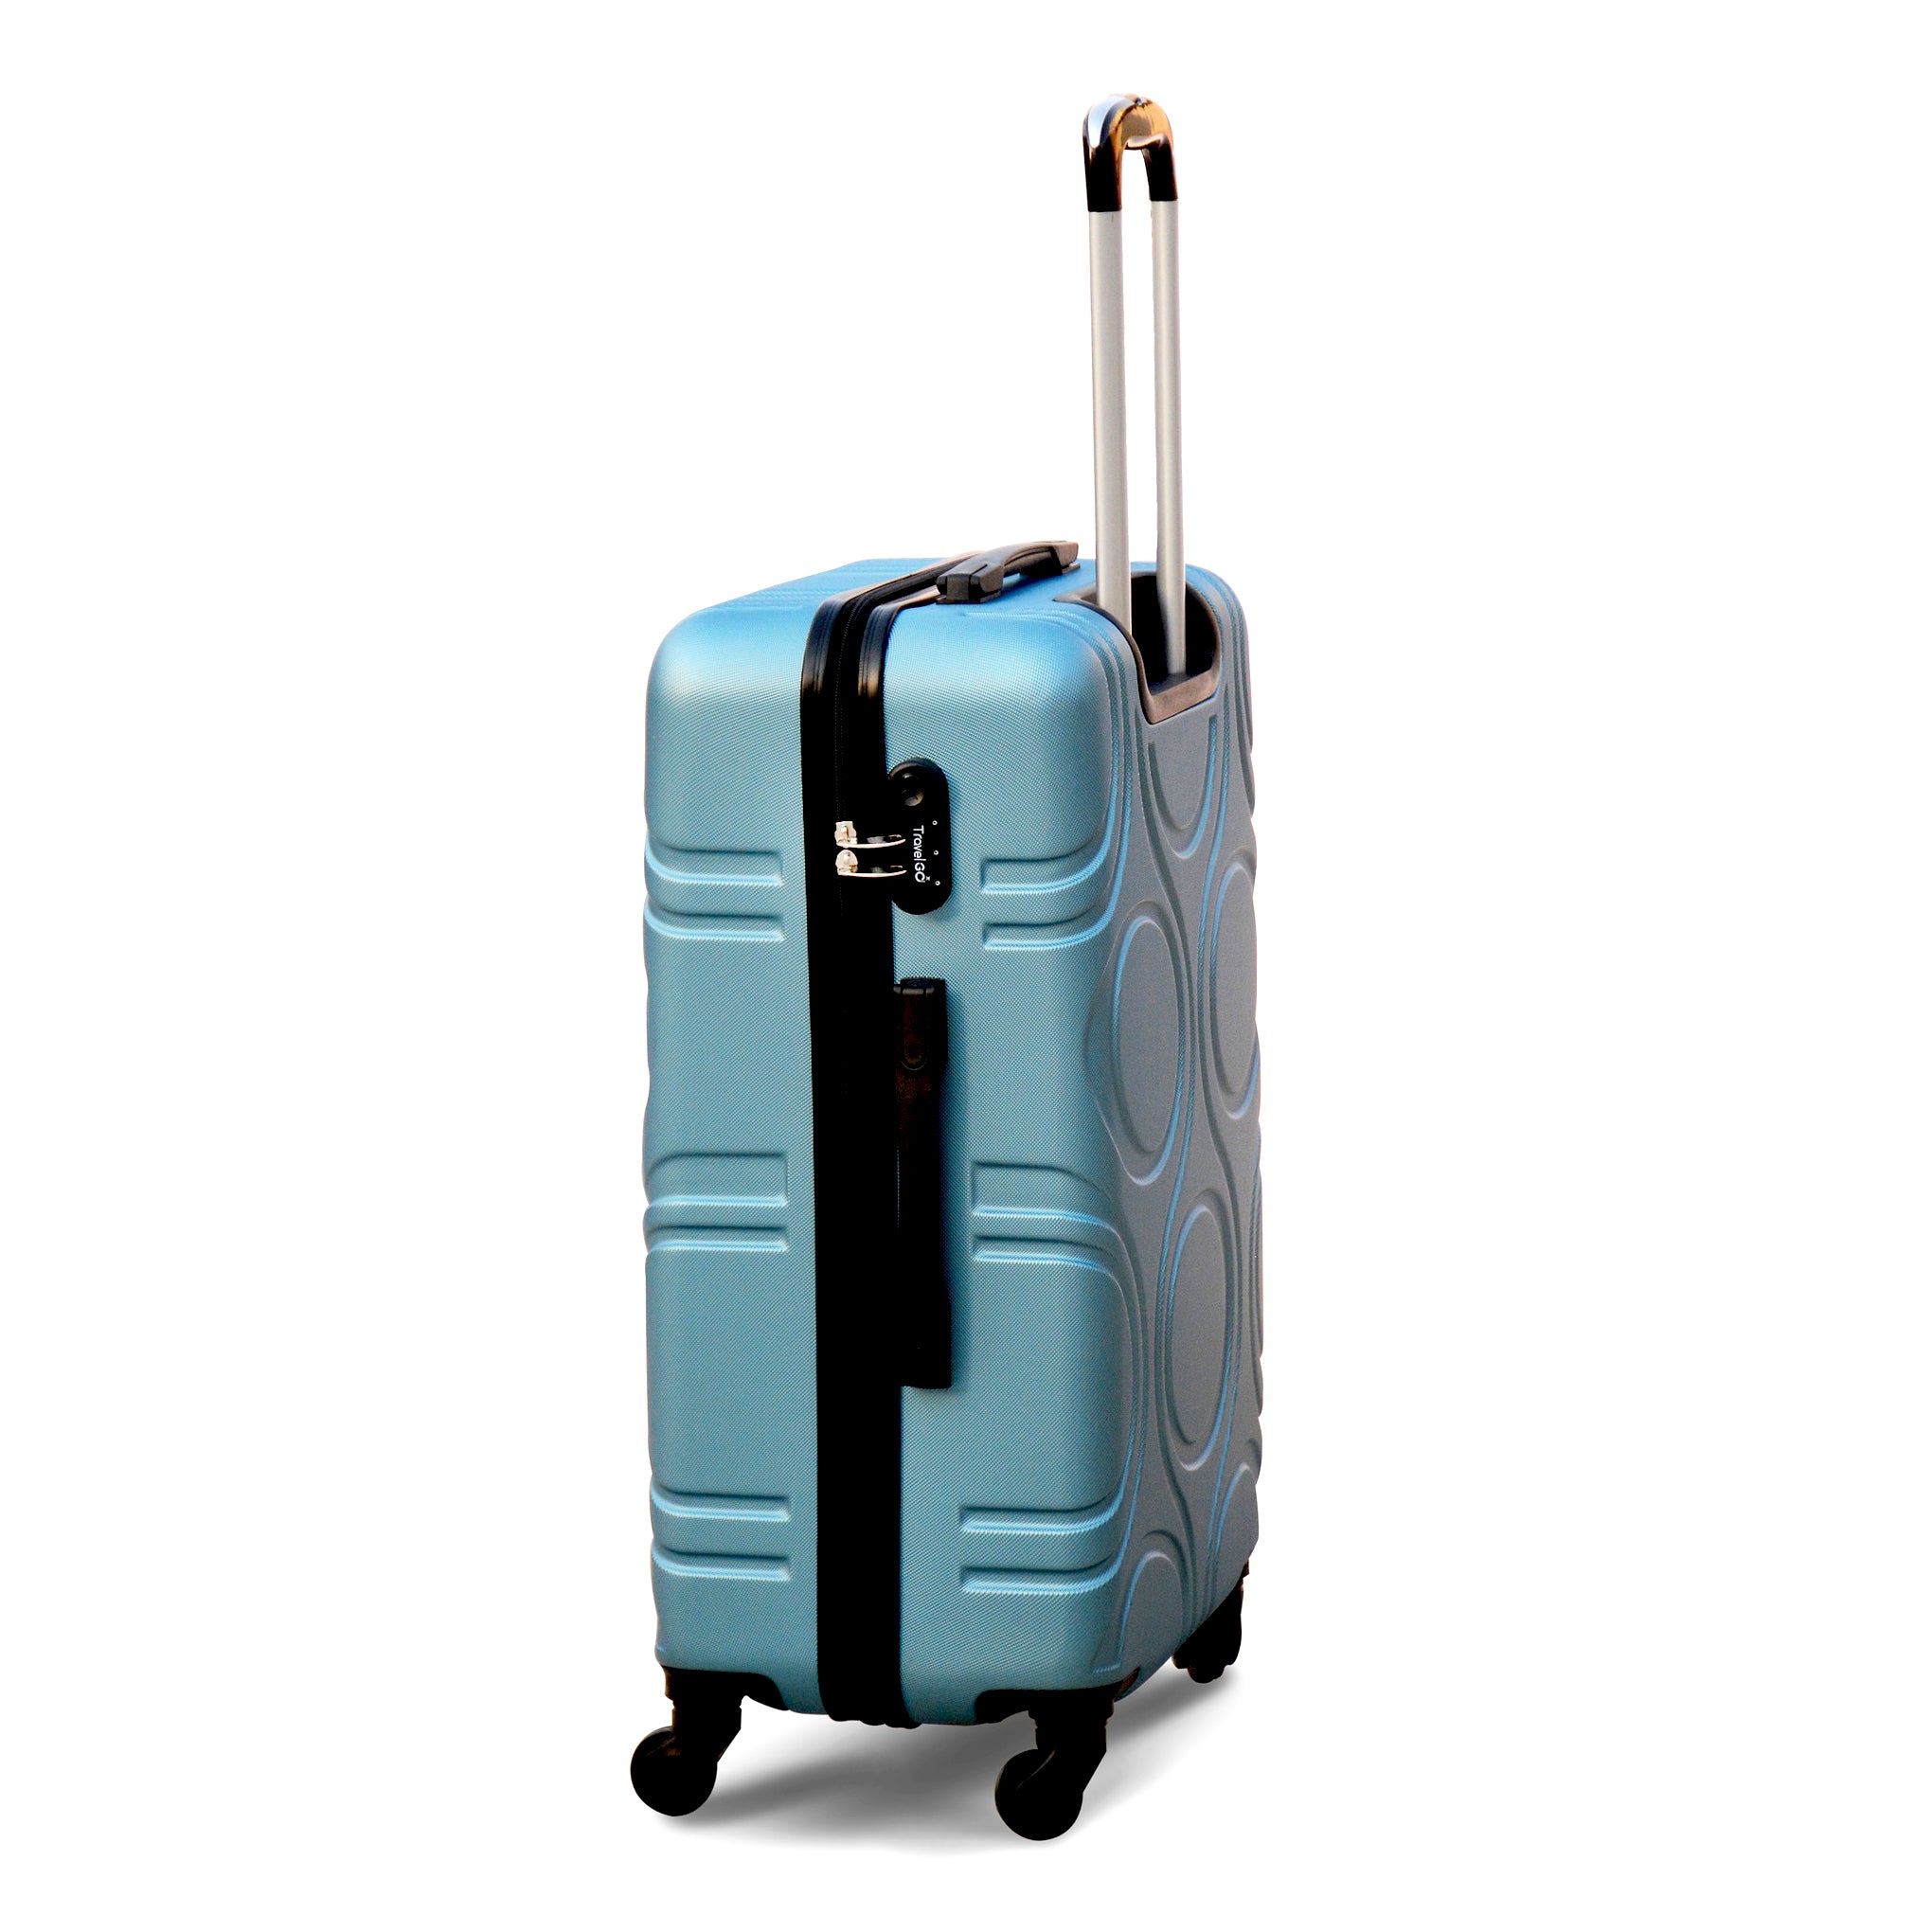 Light Weight Abs Luggage | Hard Case Trolley Bag | 3 Pcs Set 20” 24” 28 Inches | 2 Years Warranty | Yinton 2208 L Blue